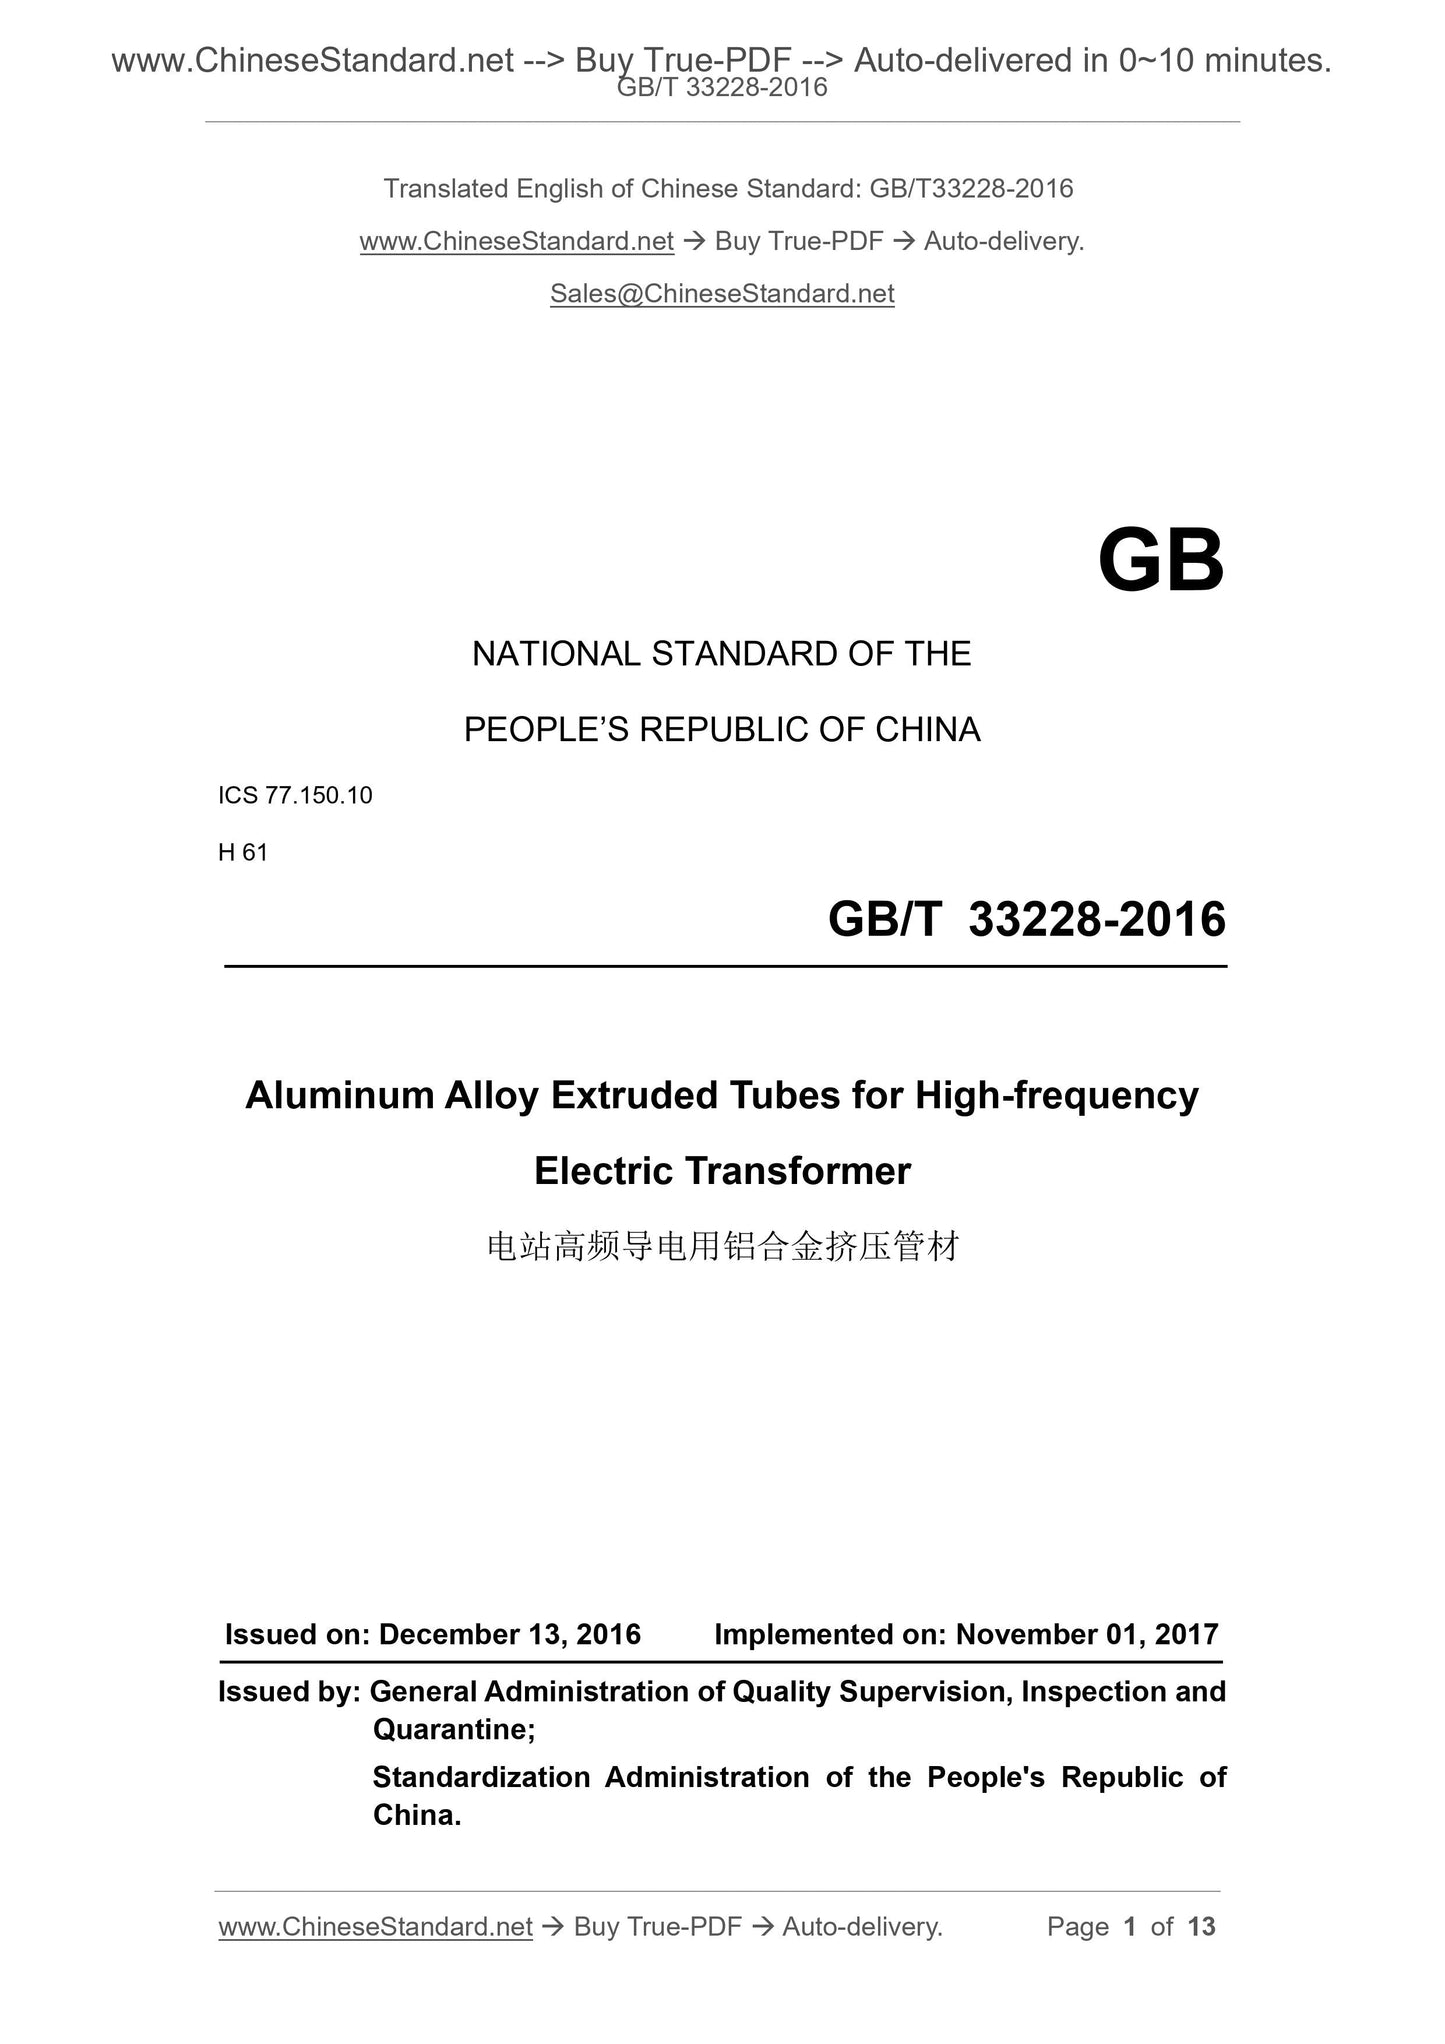 GB/T 33228-2016 Page 1